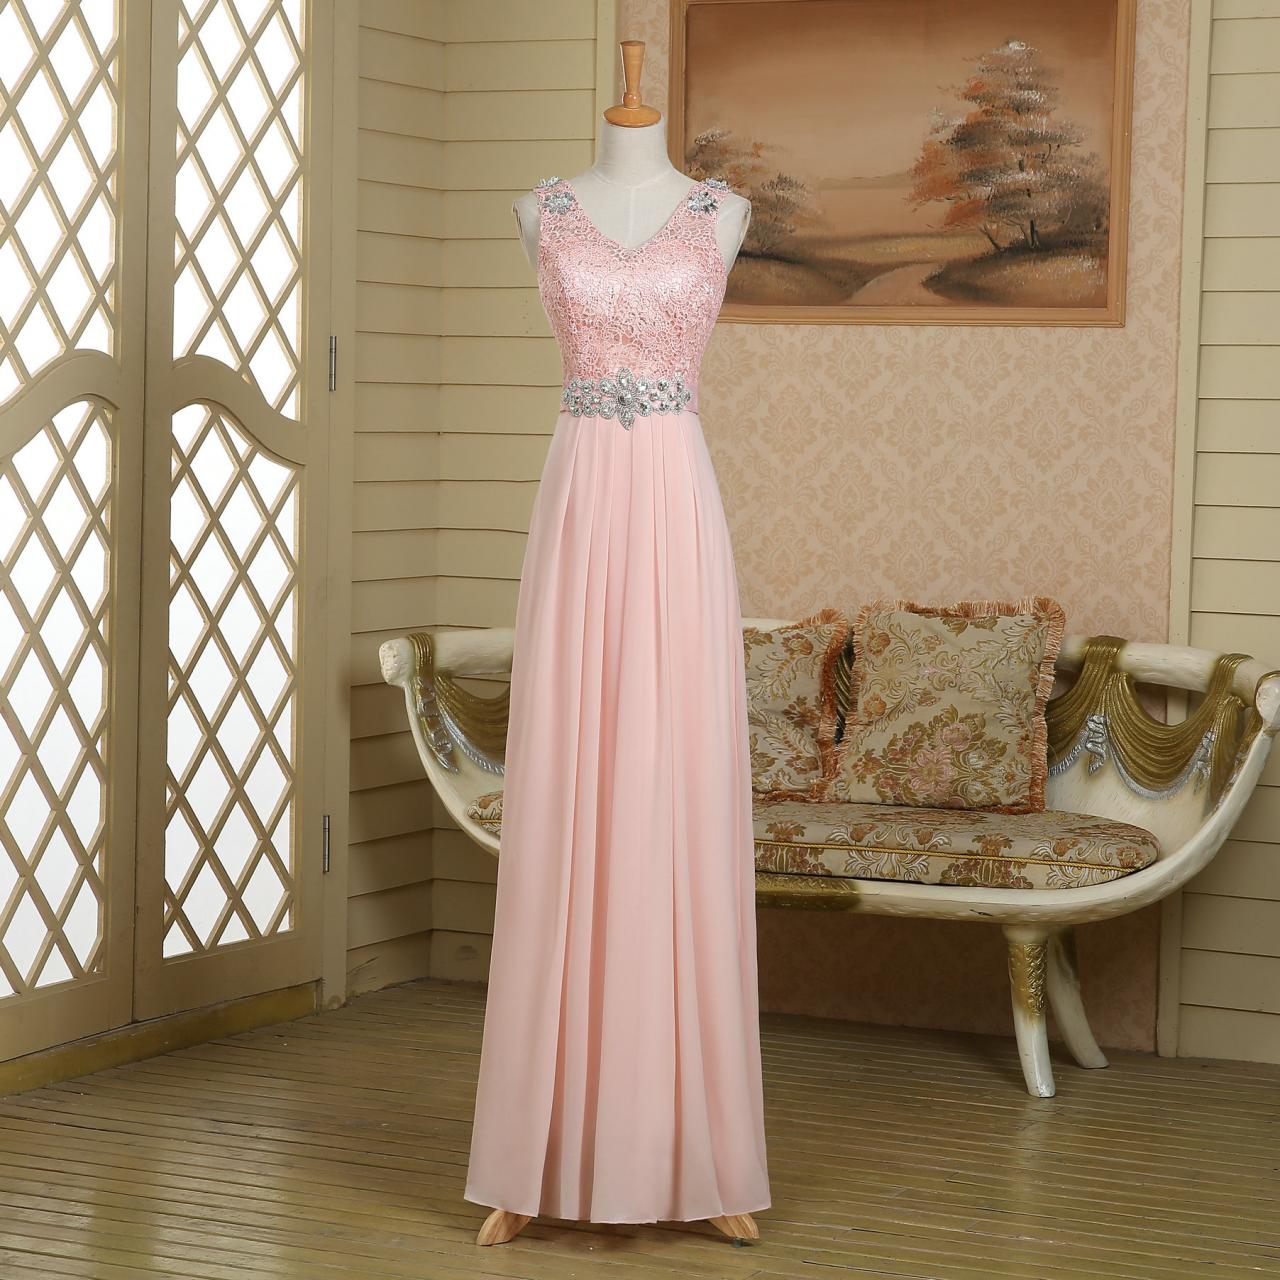 Modest Long Straps V Neck Crystals Beaded Stone Light Pink Peach Chiffon Lace Corset Woman Prom Dress,evening Dress,homecoming Dress,party